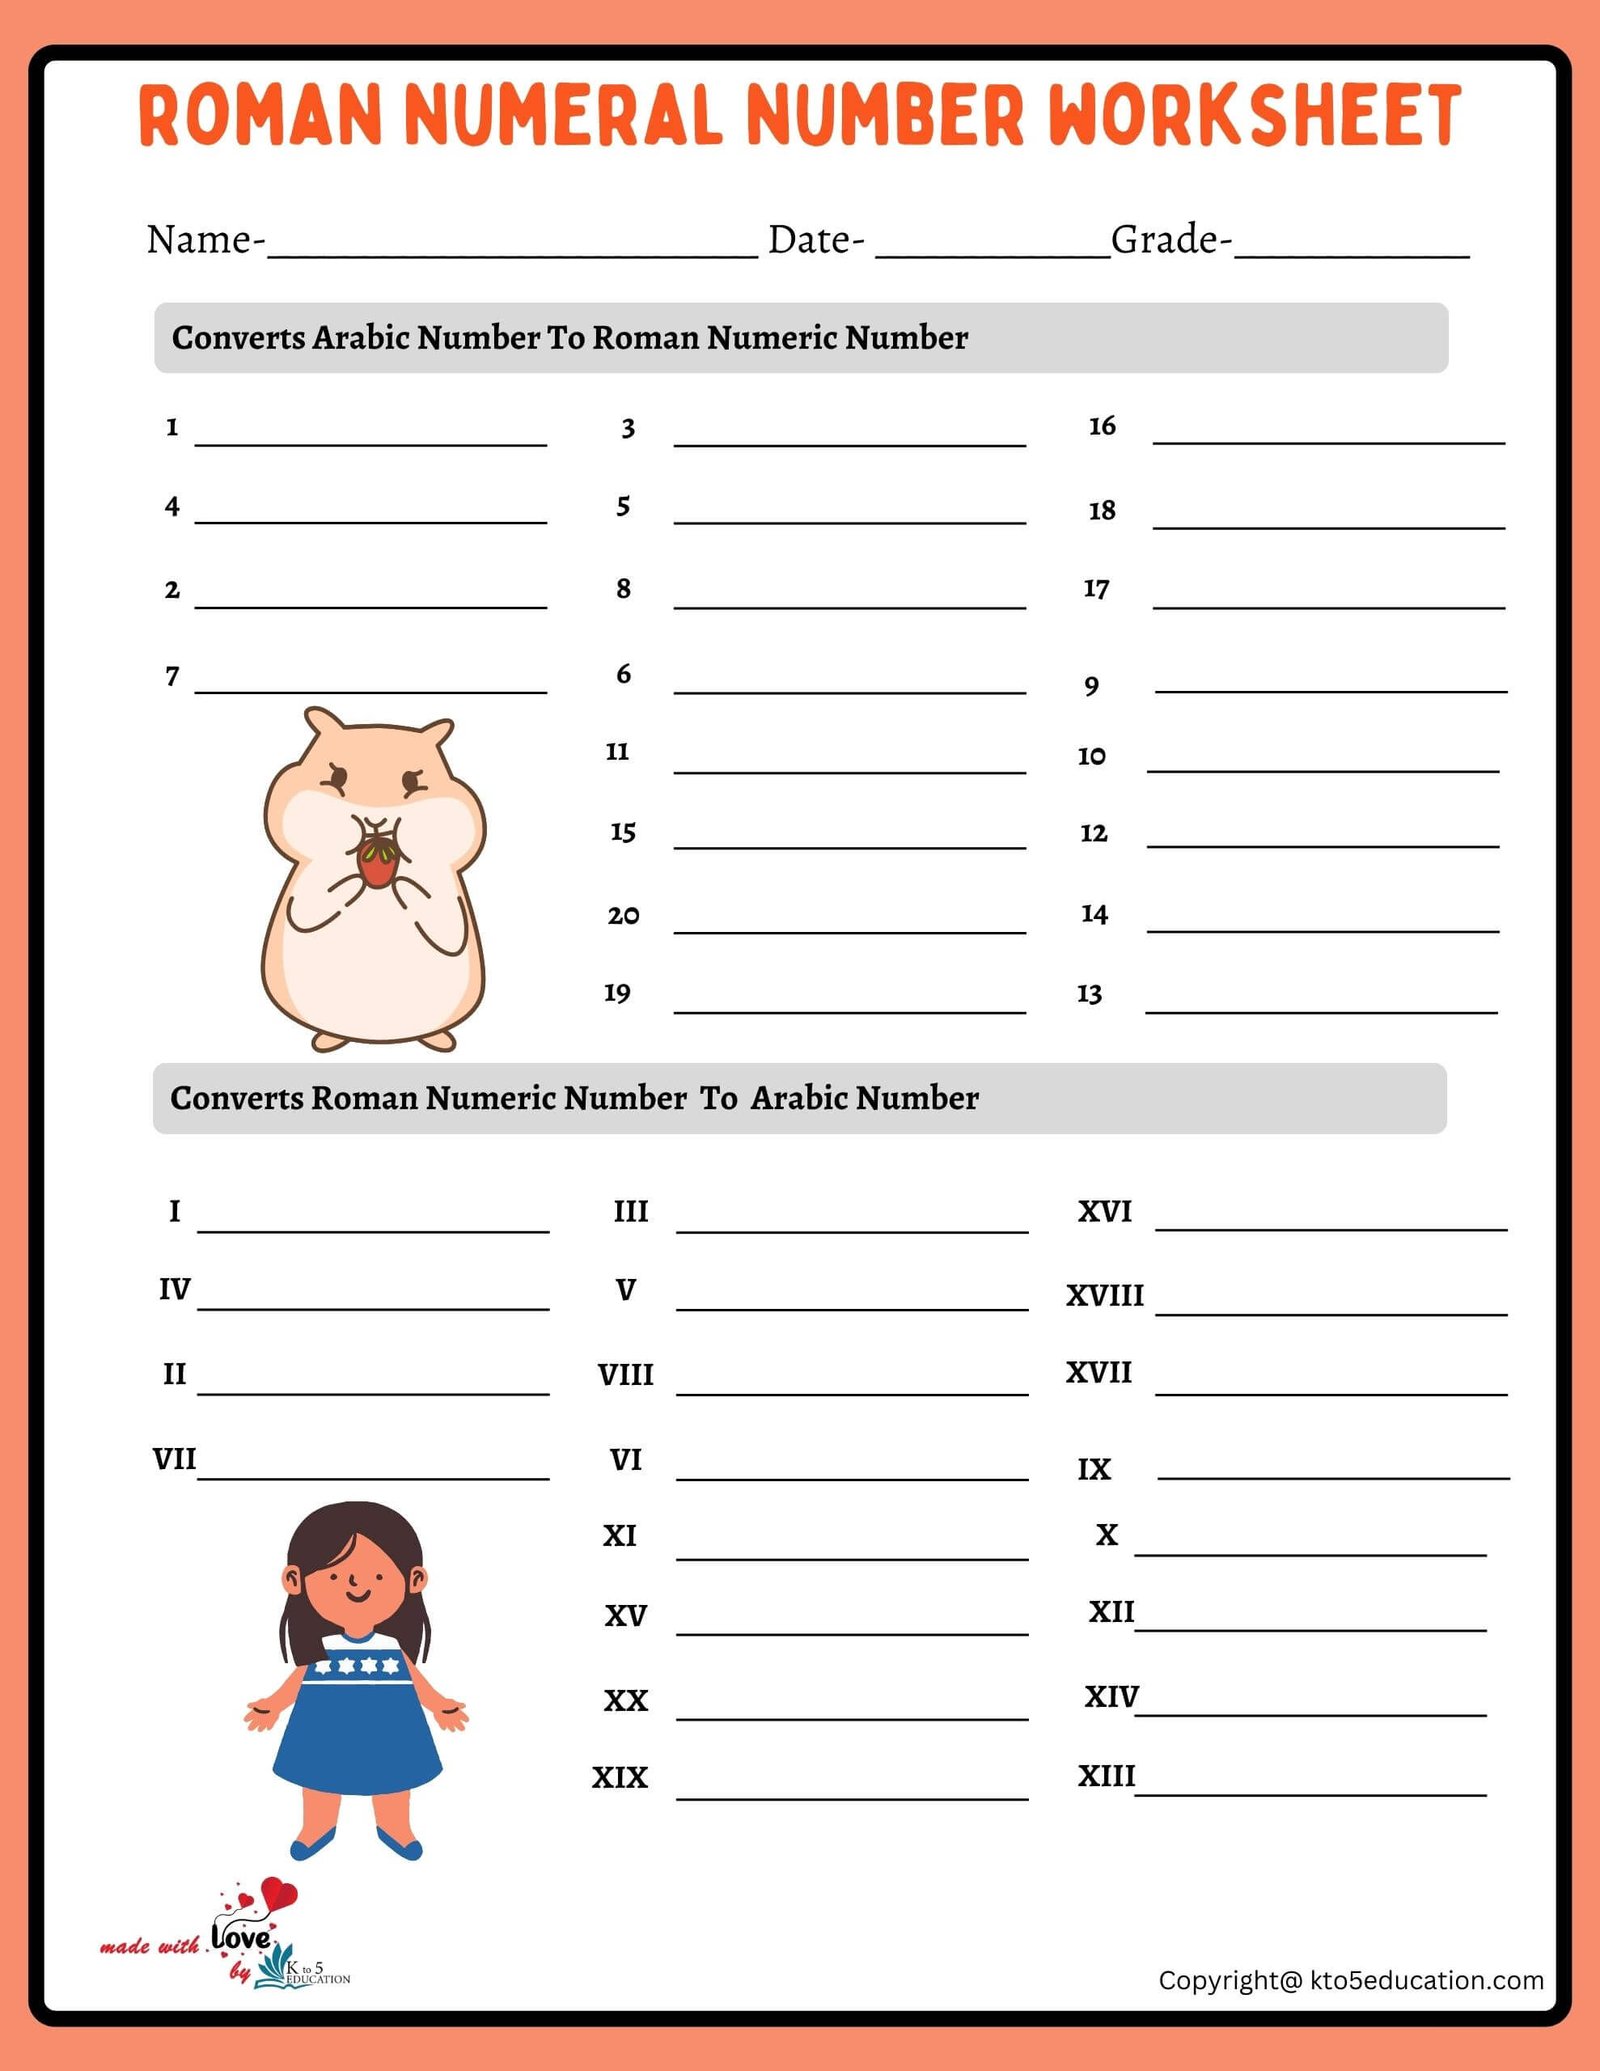 Roman Numeral Worksheet 1 to 20